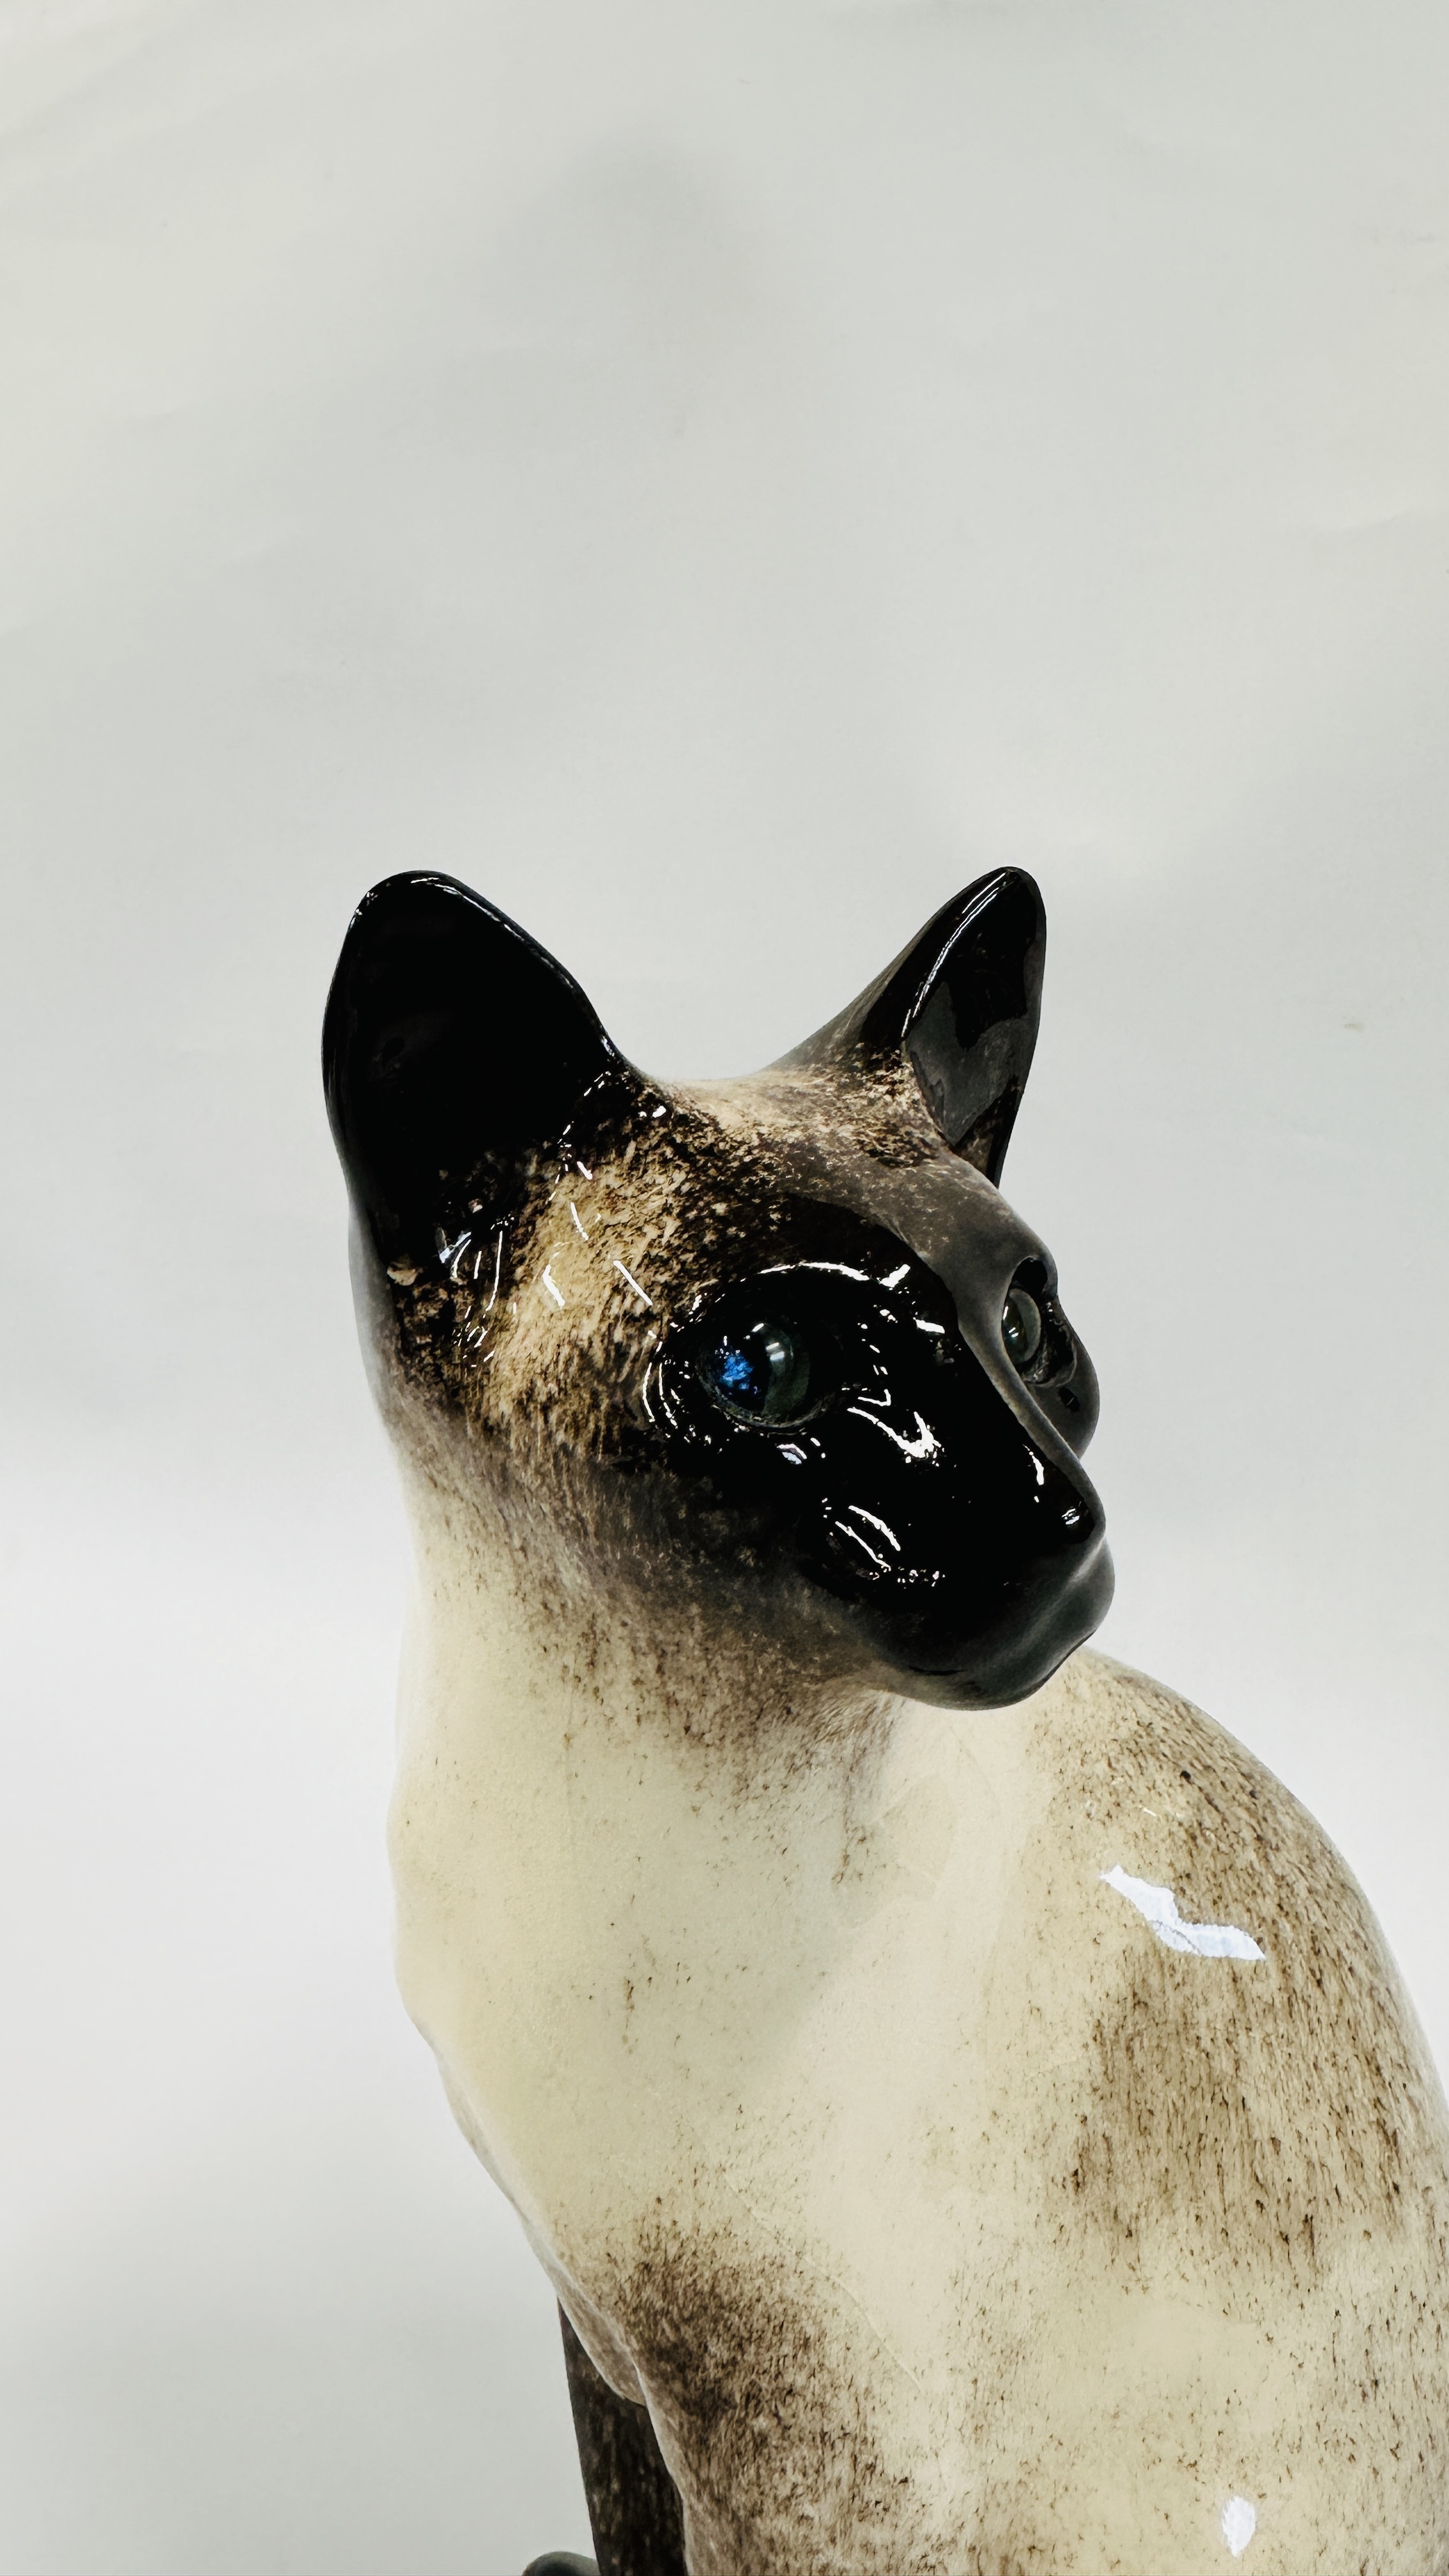 A HANDCRAFTED WINSTANLEY NO. 5 SEATED CAT FIGURE - HEIGHT 32CM. - Image 3 of 6